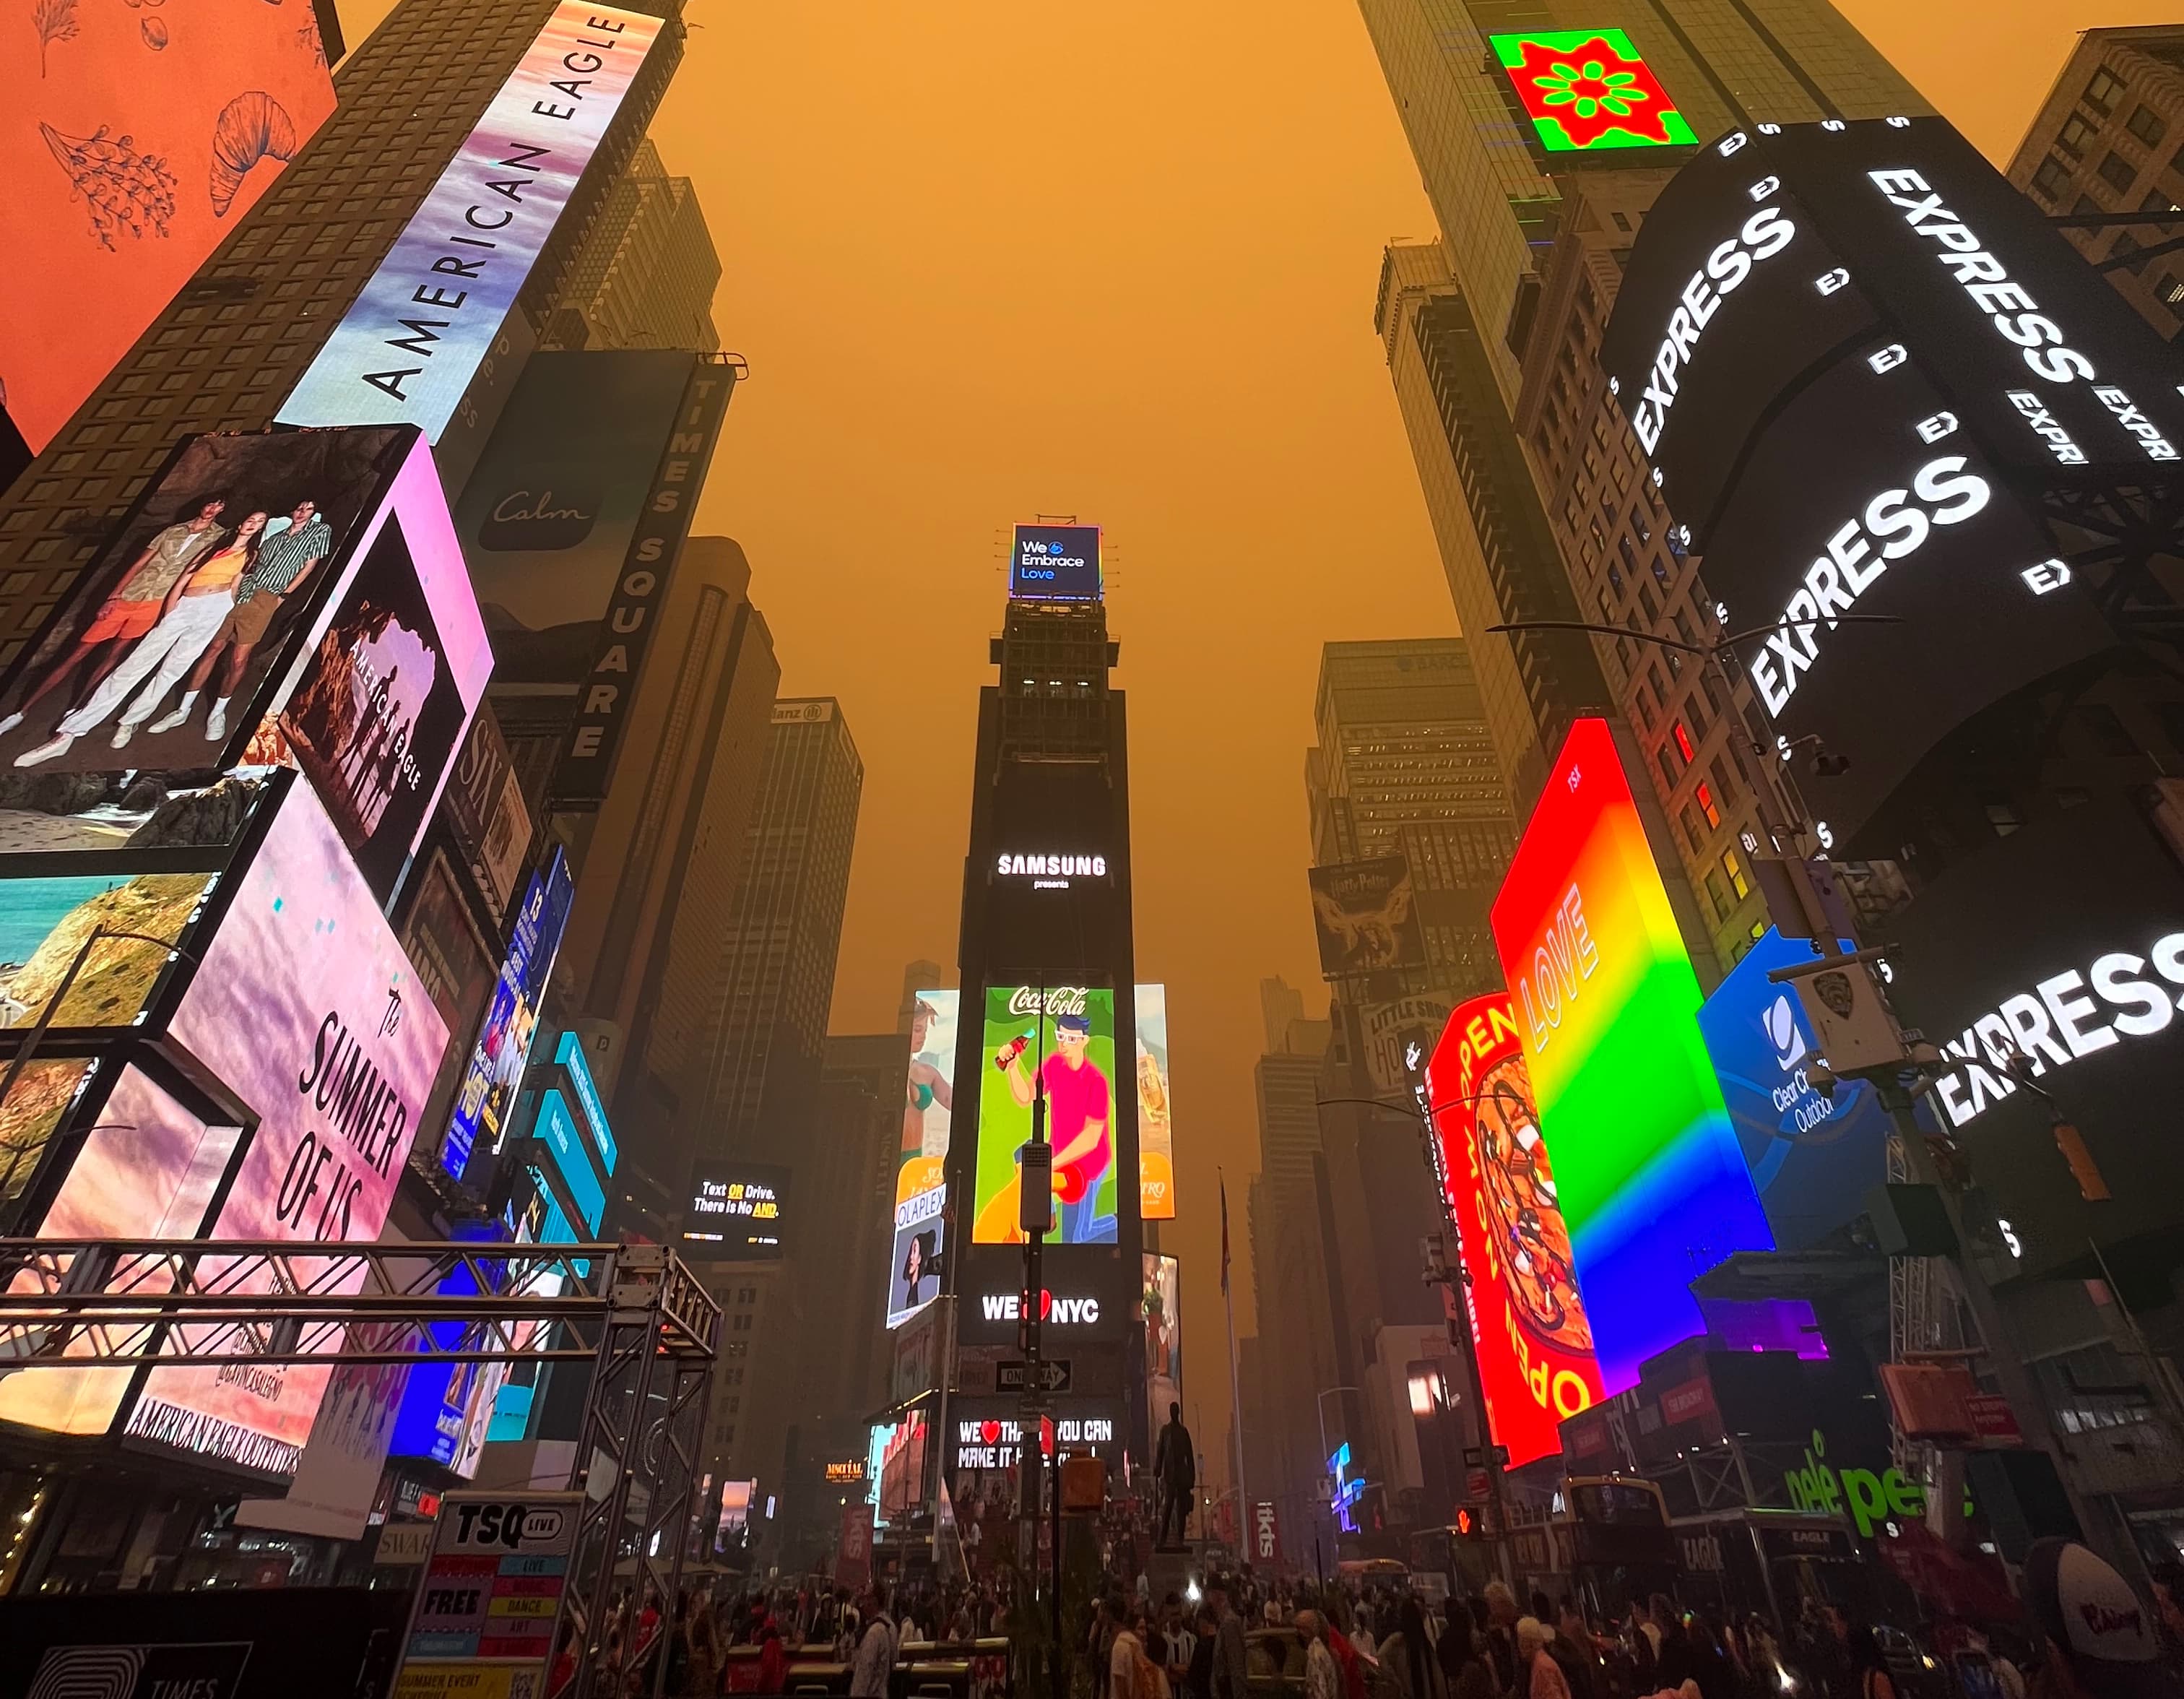 Canada wildfire smoke: New York City has world's worst air pollution